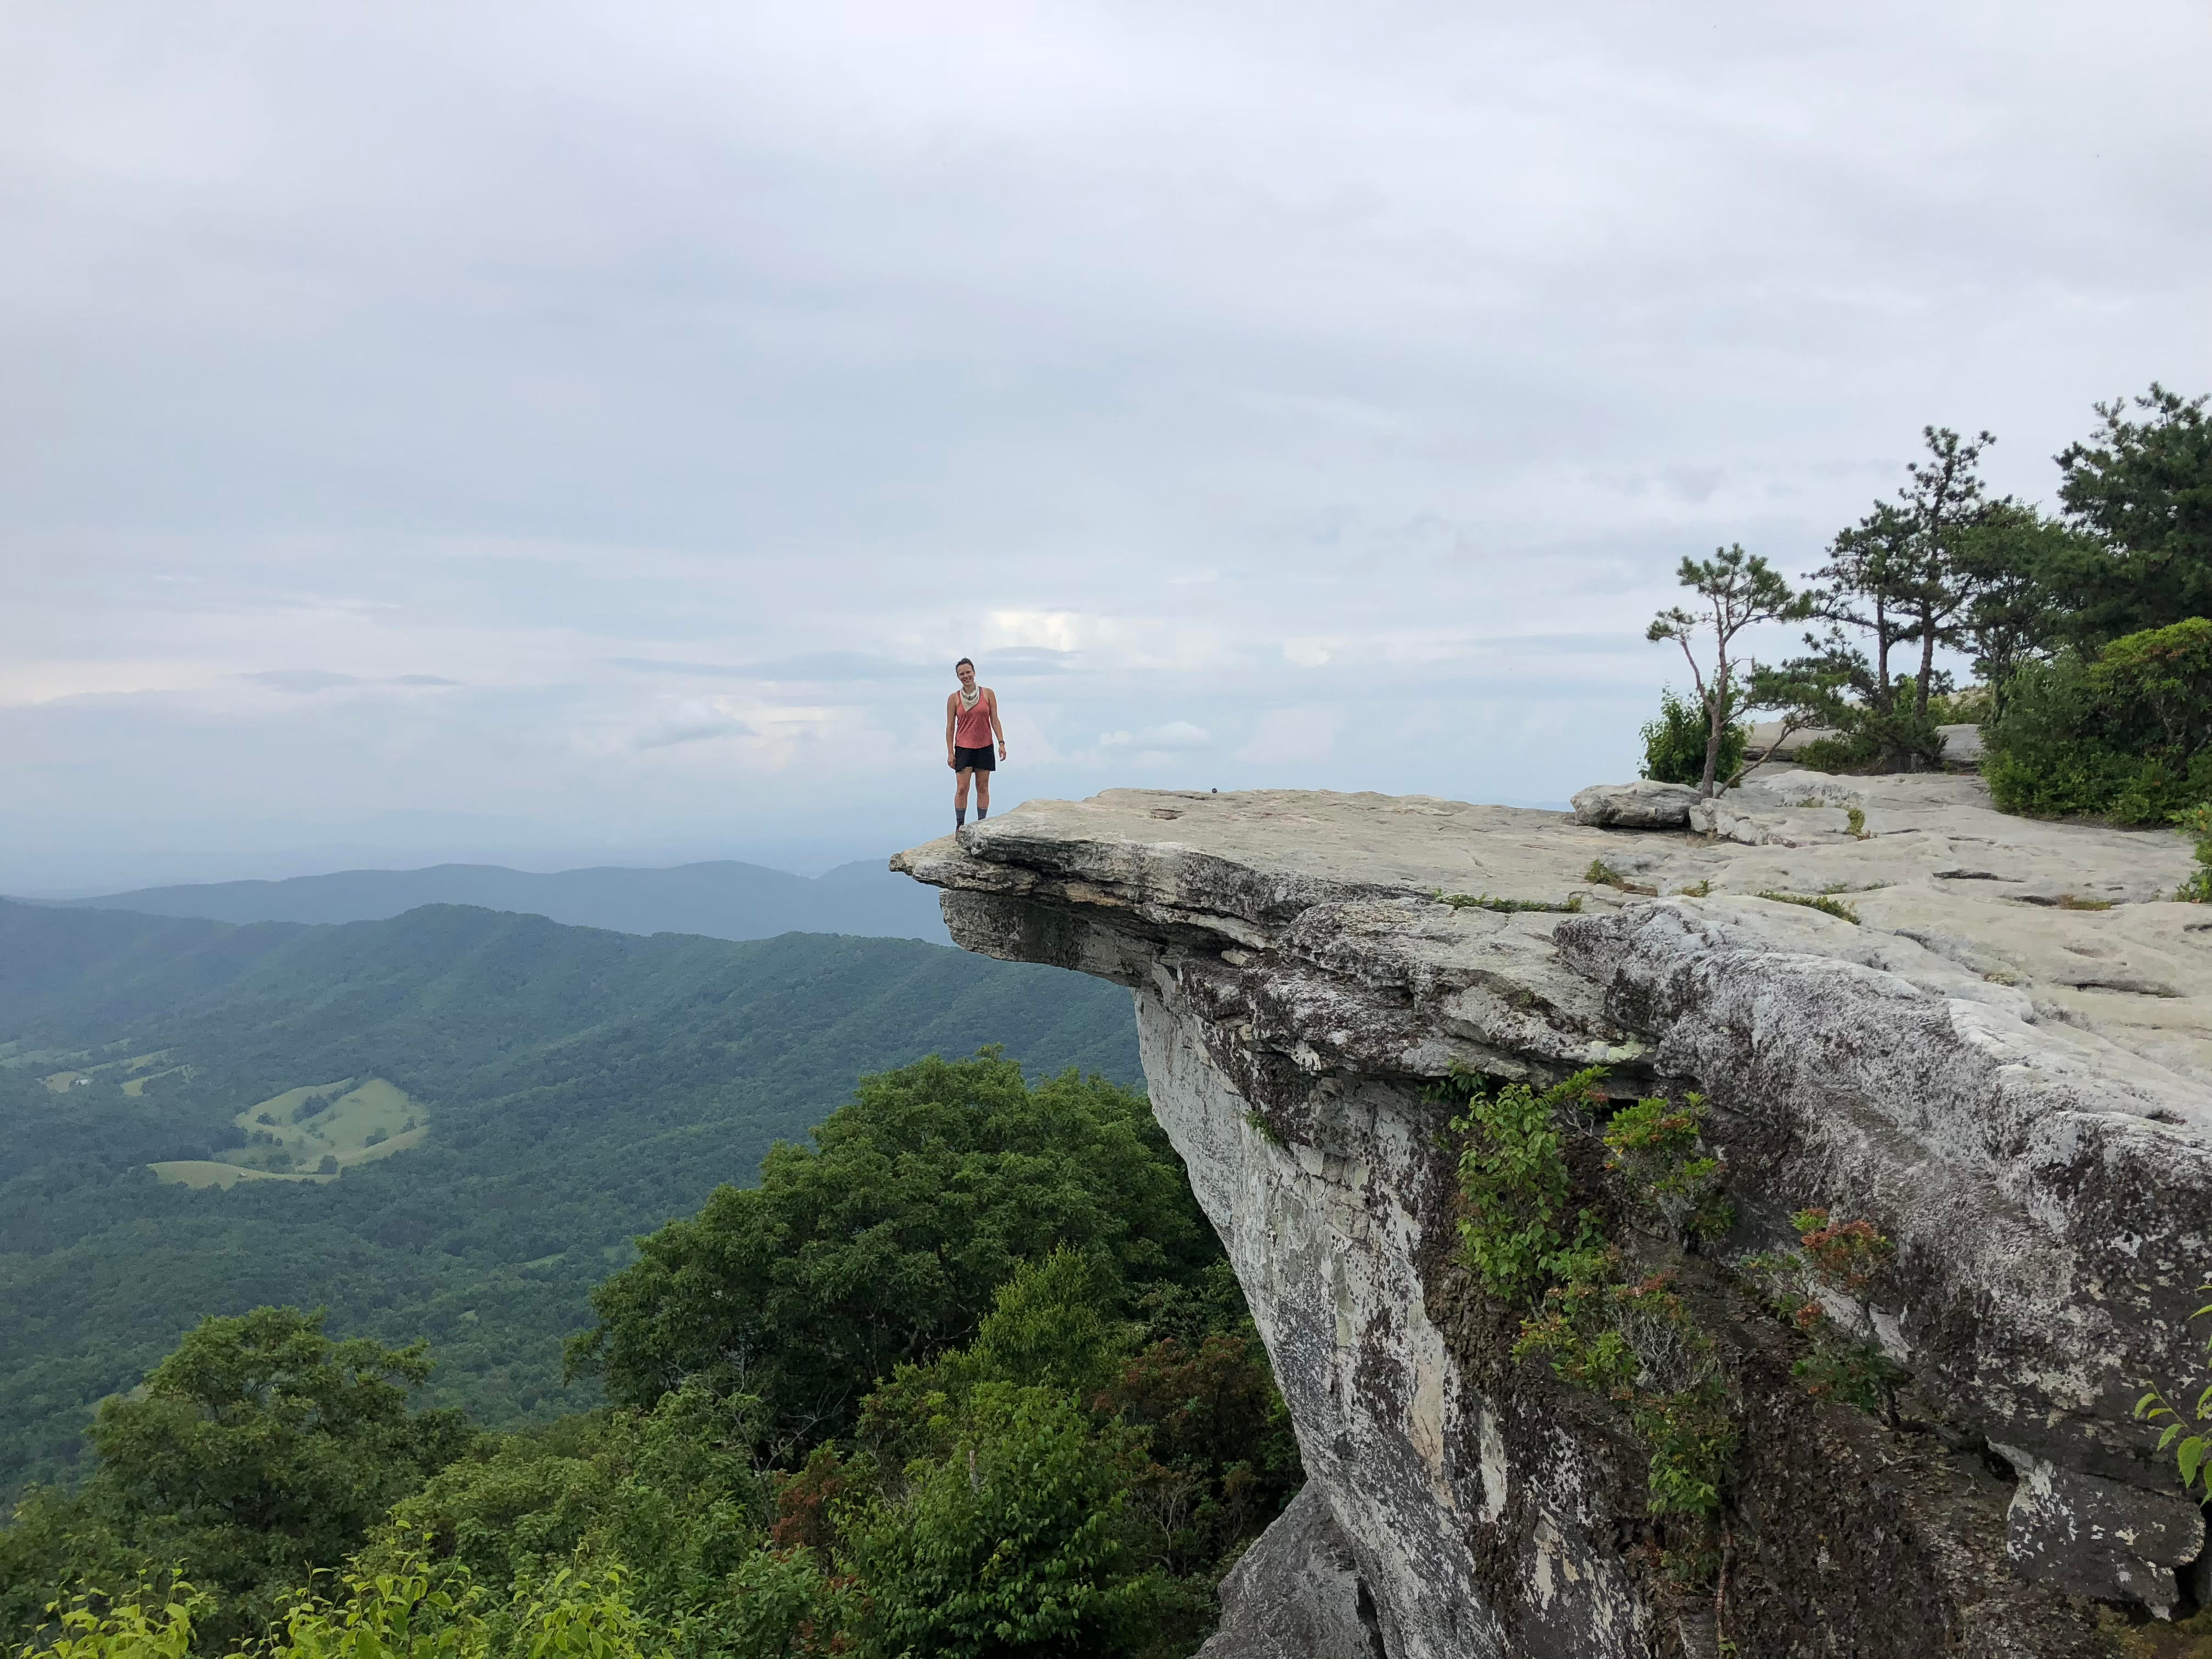 McAfee Knob, the most photographed spots on the Appalachian Trail